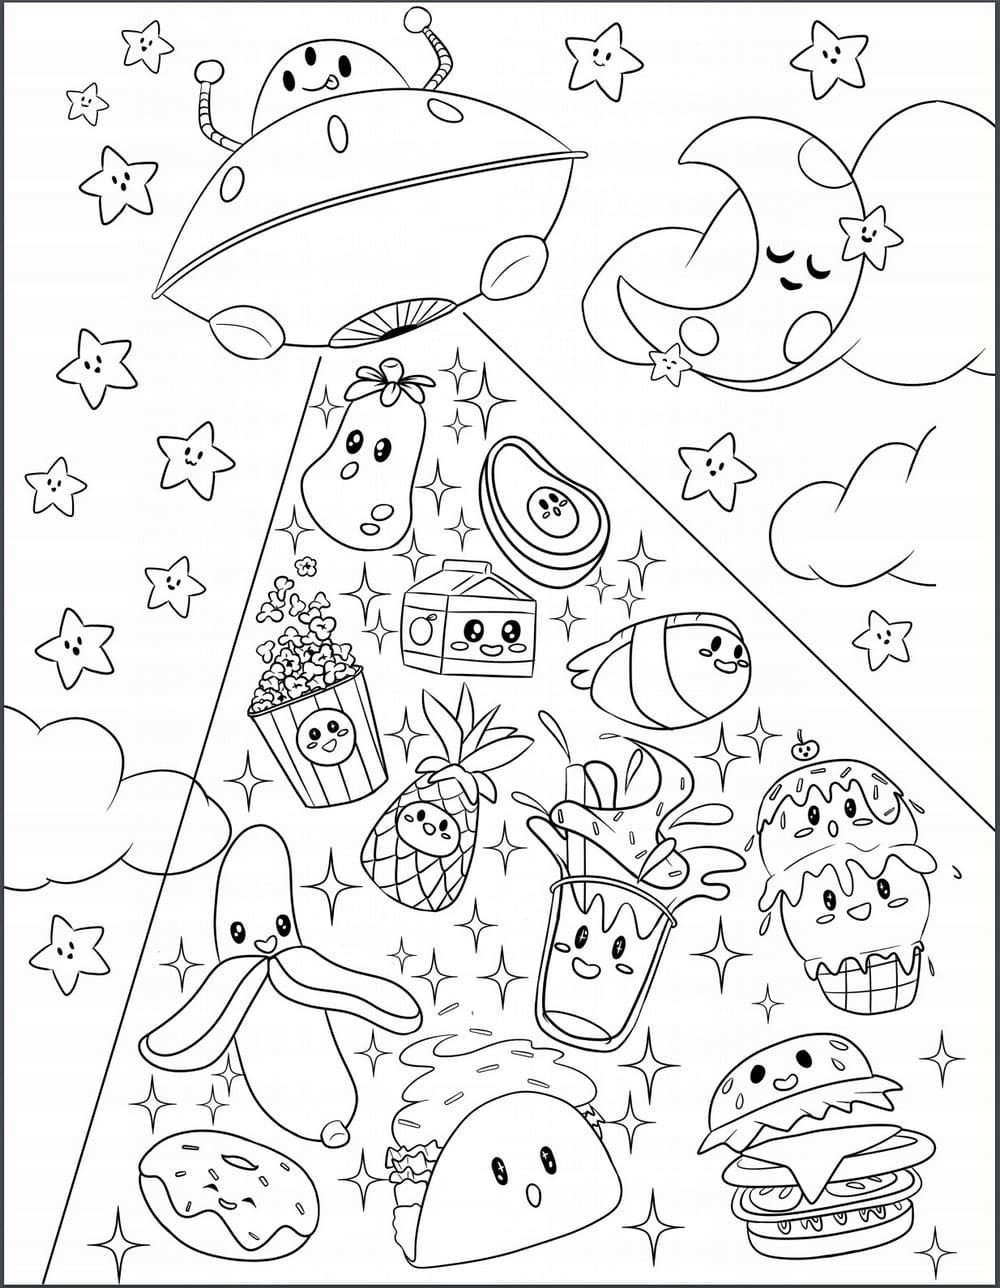 Squishmallows coloring pages   Printable coloring pages